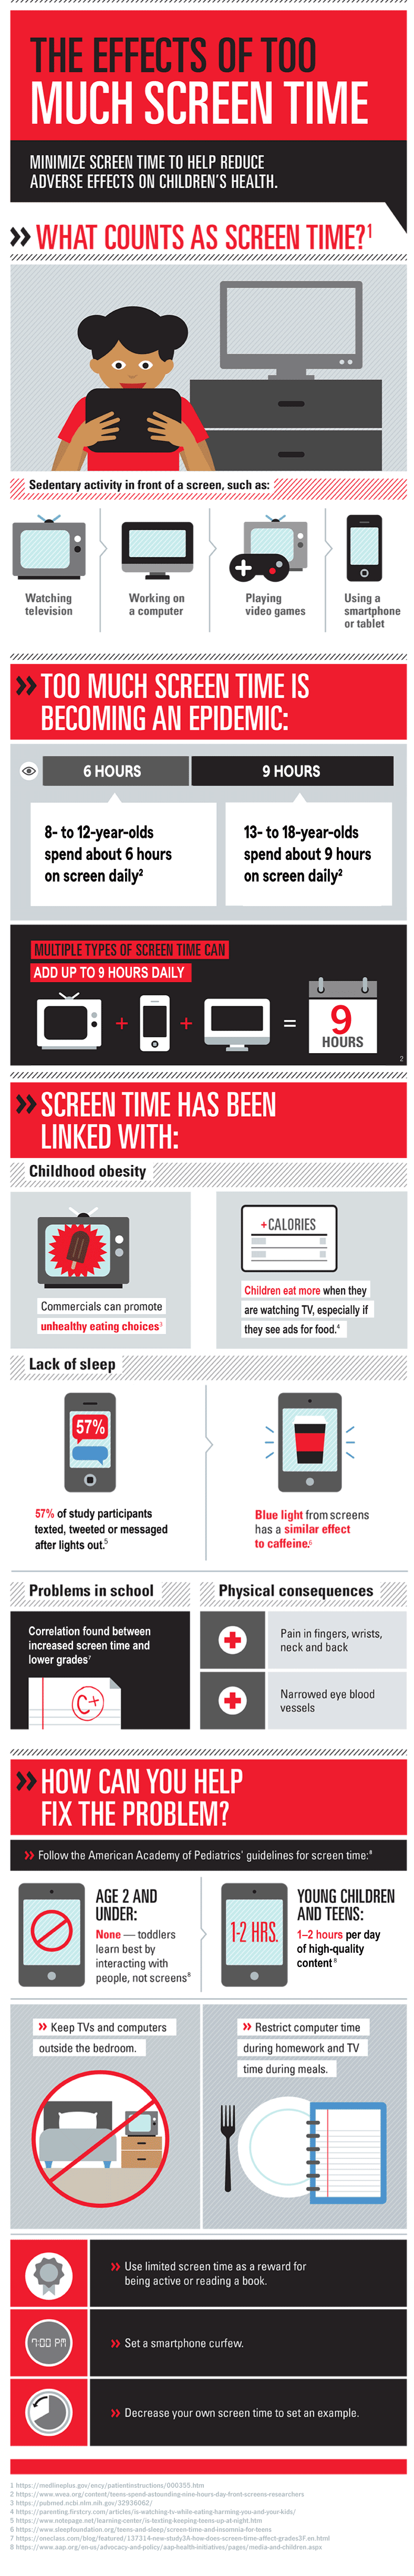 Infographic about why and how to limit kids' screen time.